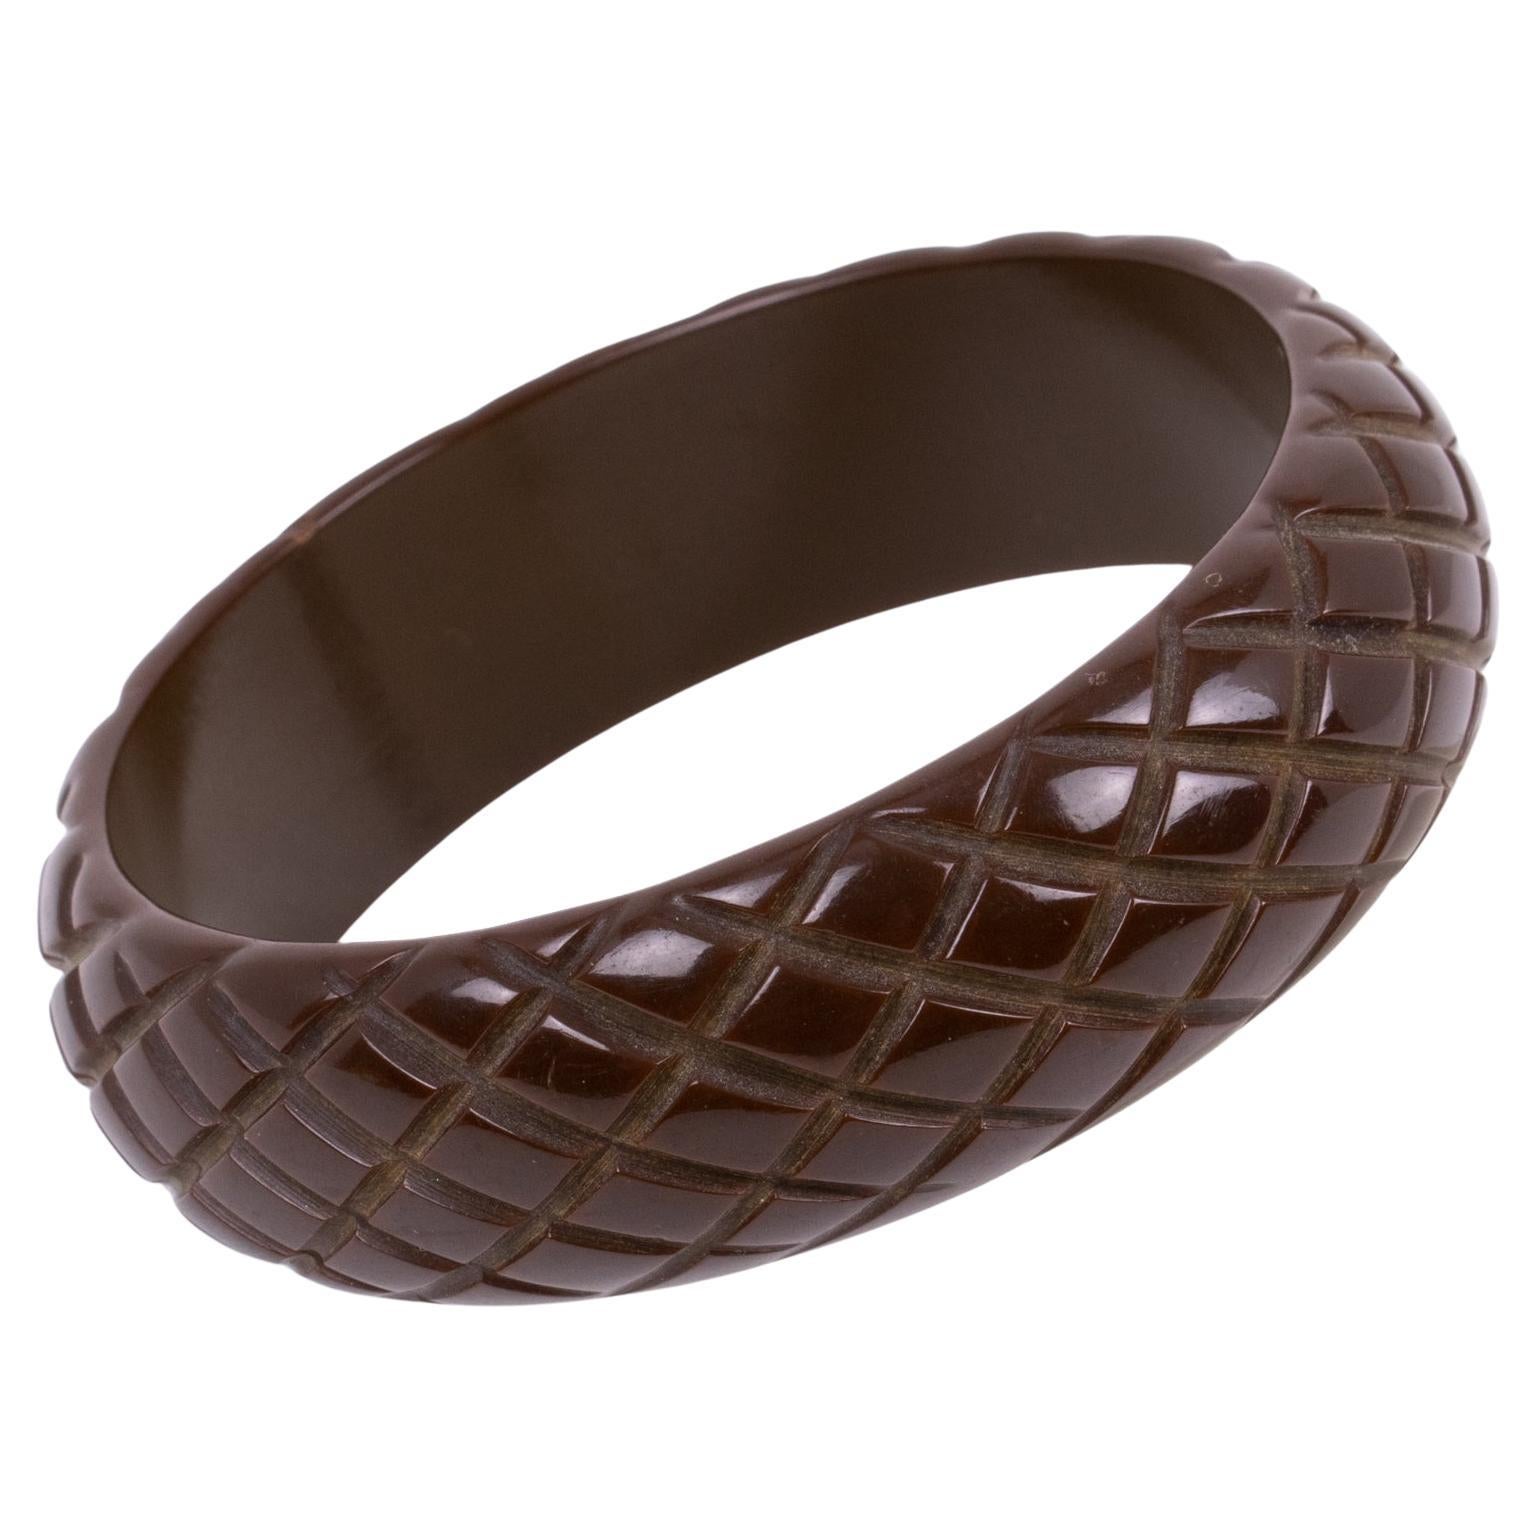 Bakelite Bracelet Bangle Cocoa Brown with Pineapple Carving For Sale